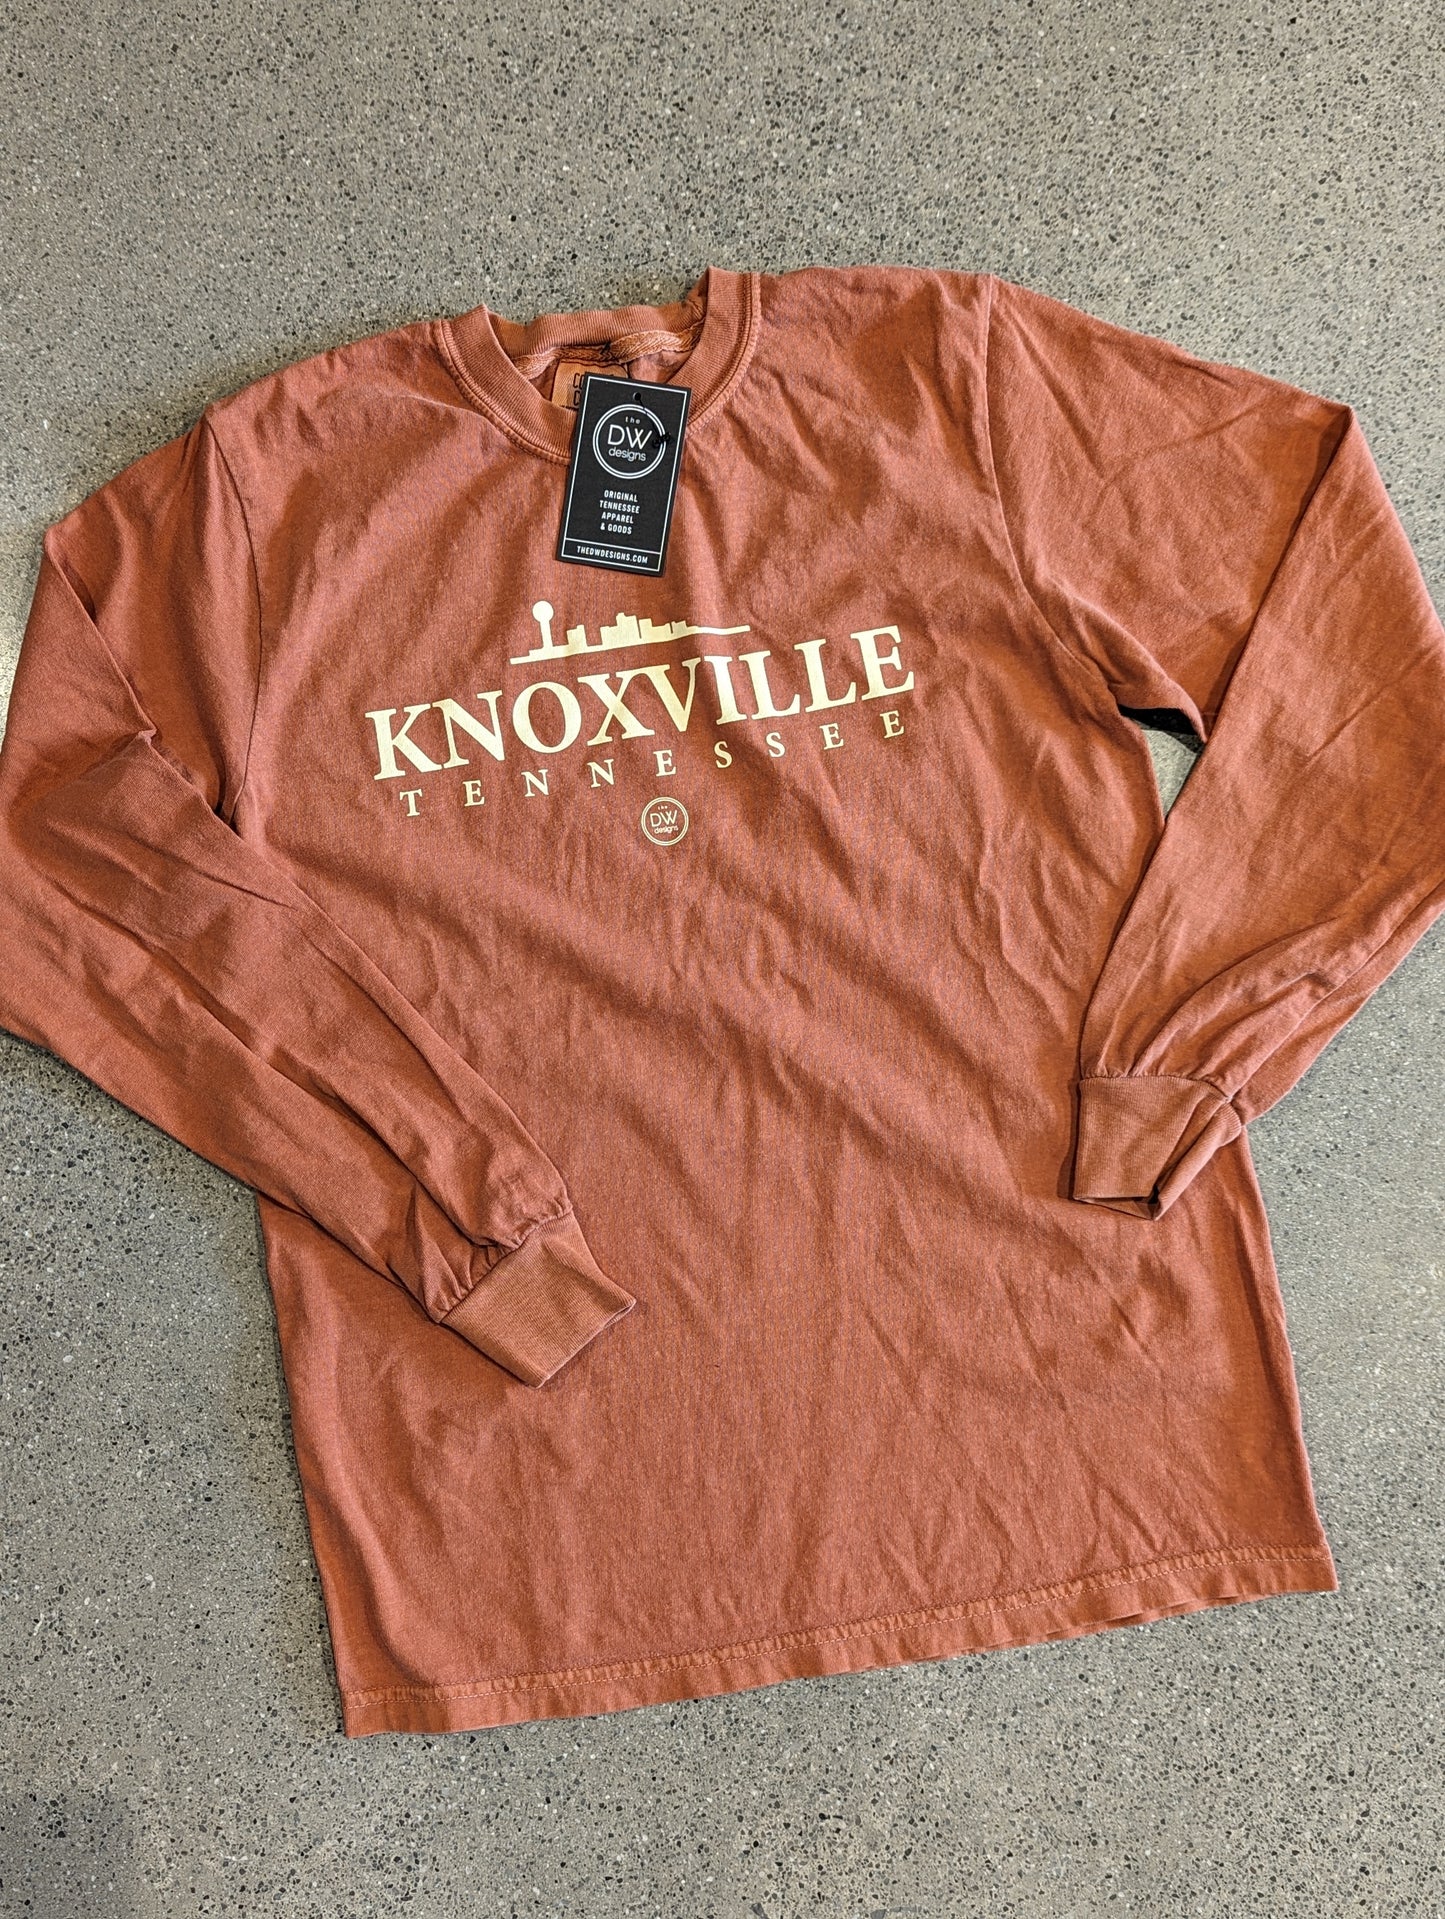 The Knoxville Tennessee Long Sleeve Tee